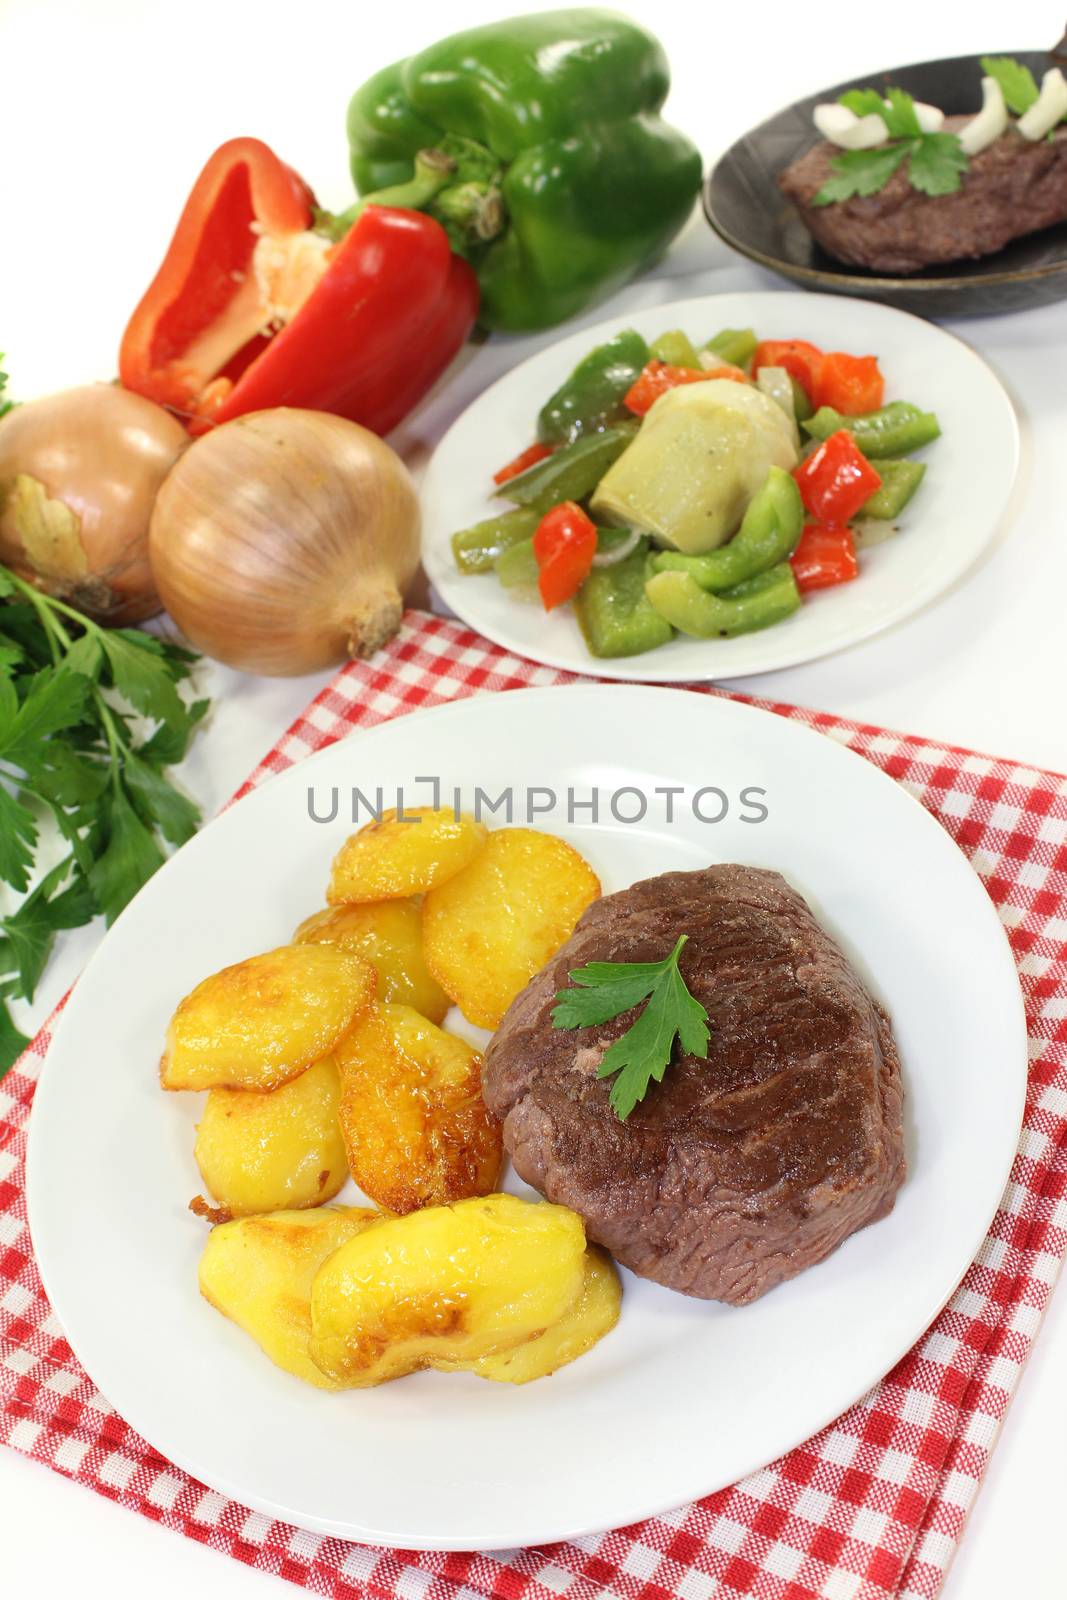 Ostrich steak with baked potatoes and peppers - artichokes - Vegetables